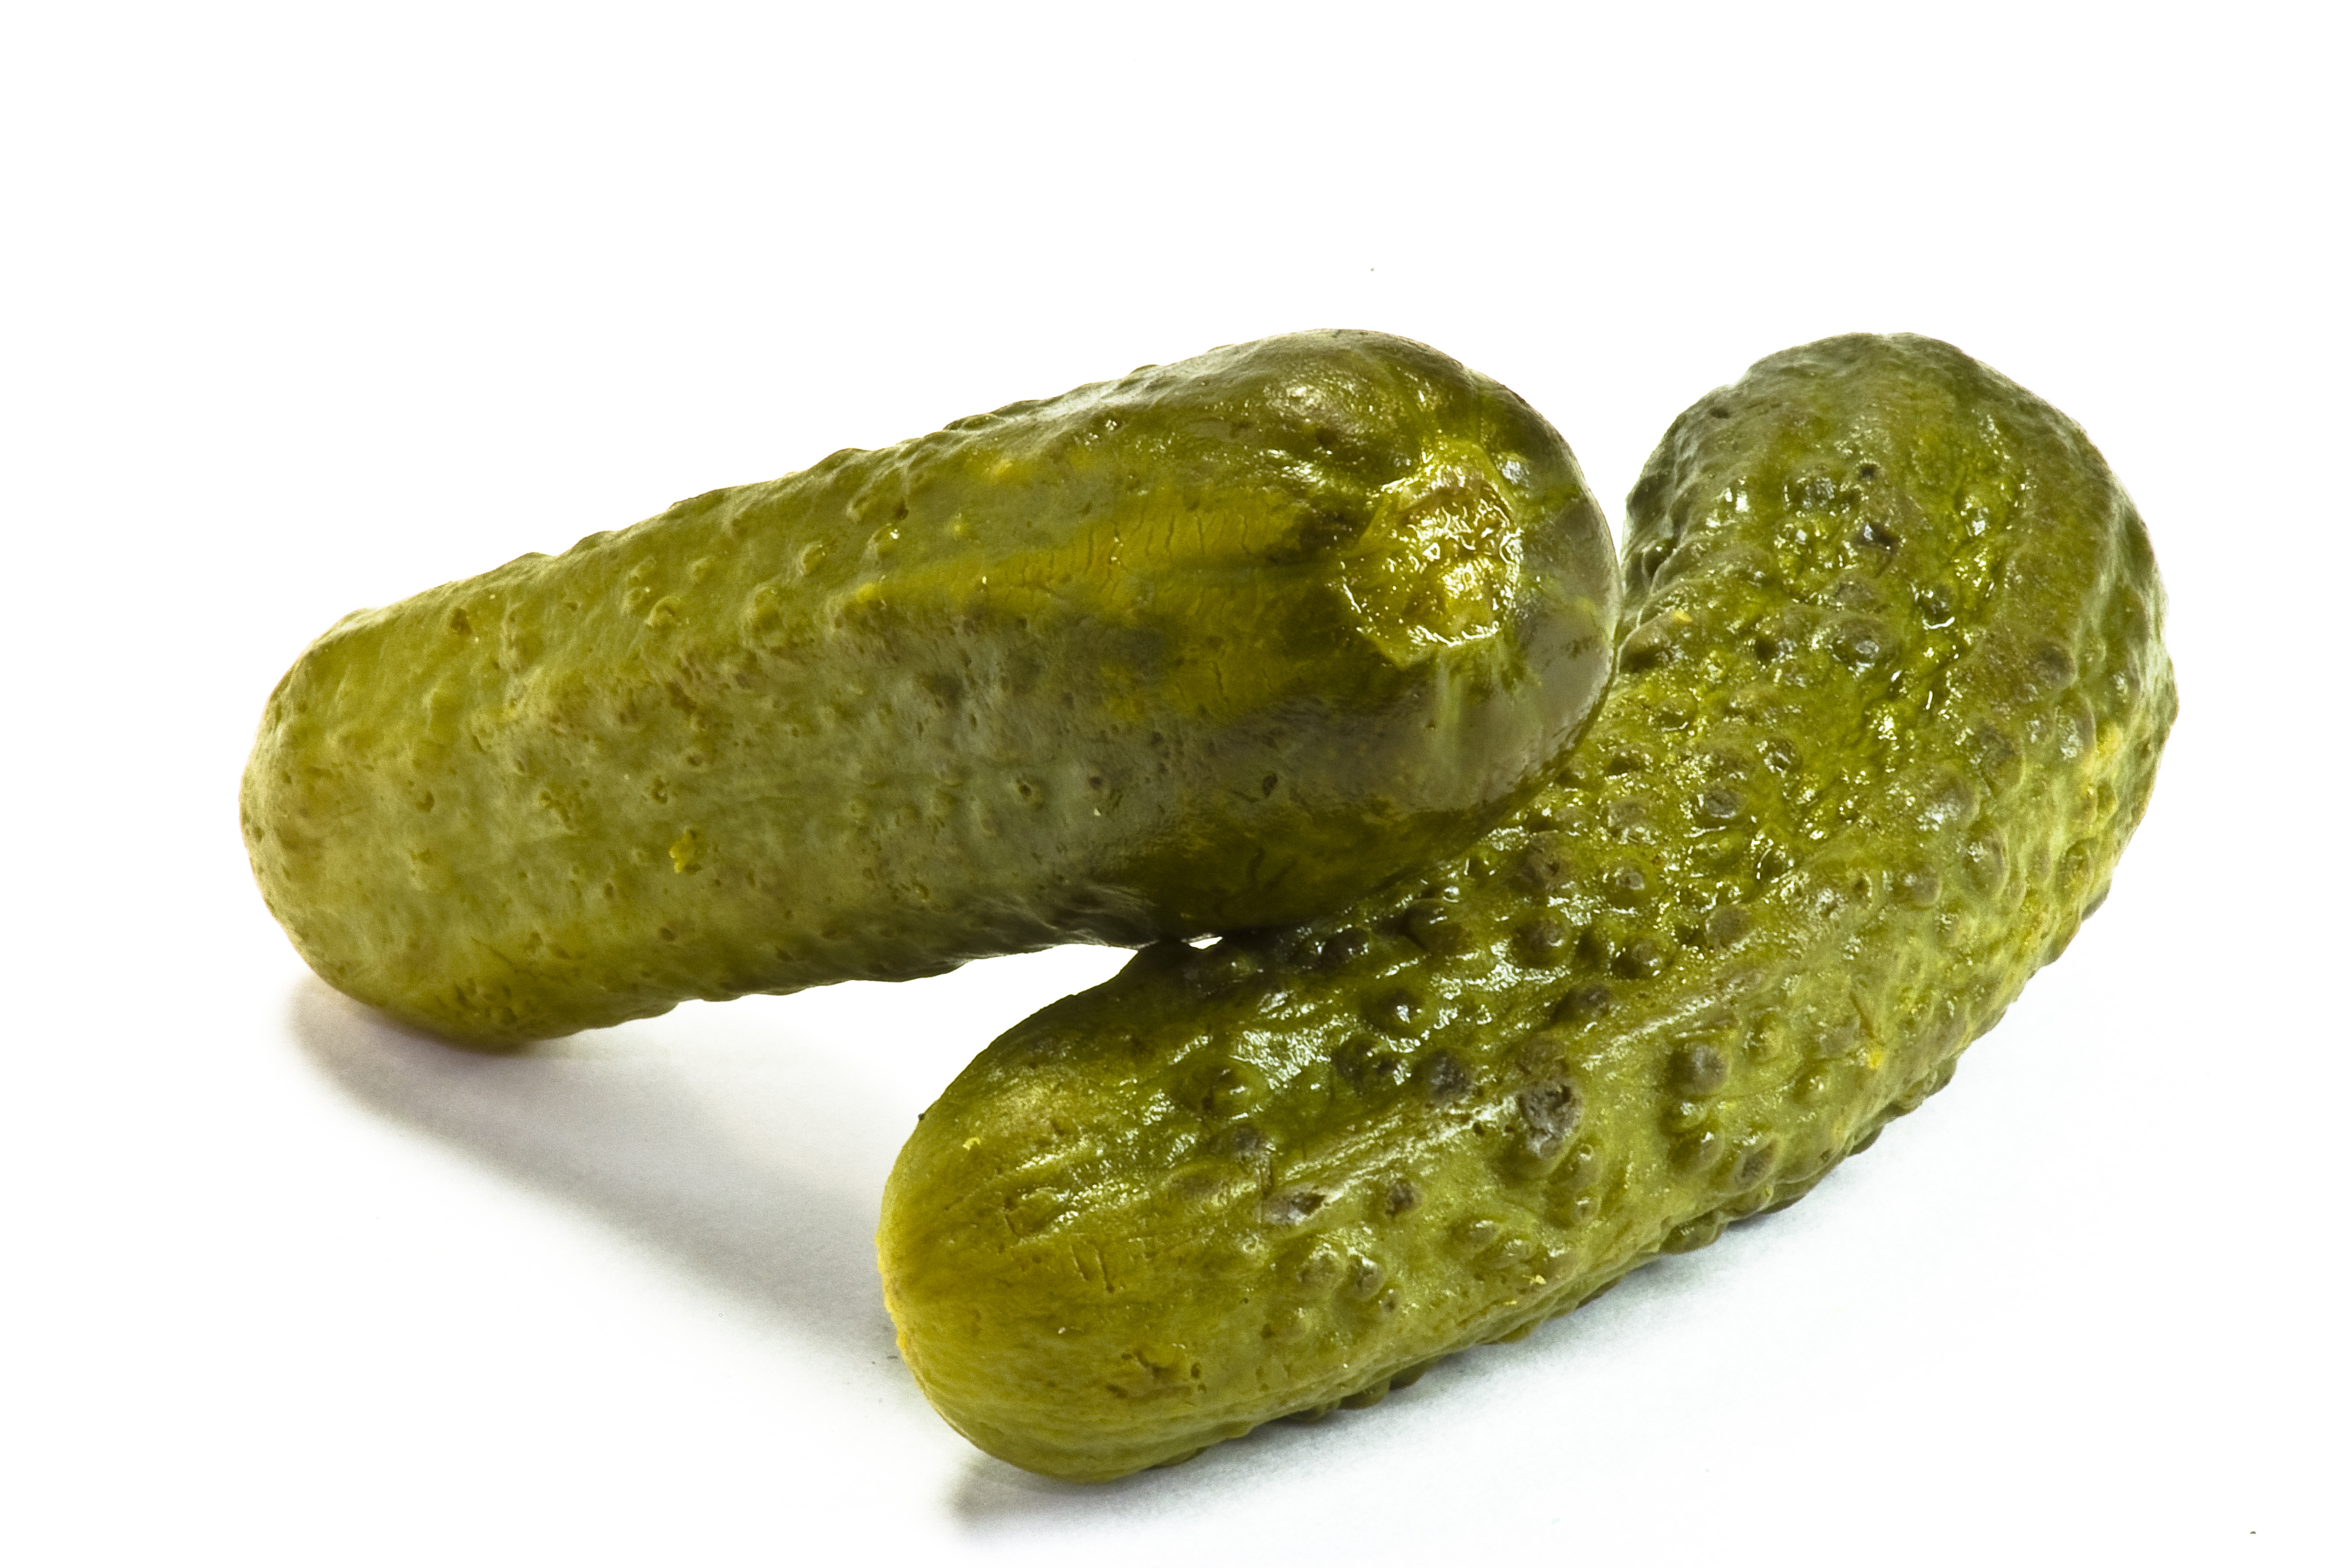 HQ Pickles Wallpapers | File 3612.95Kb